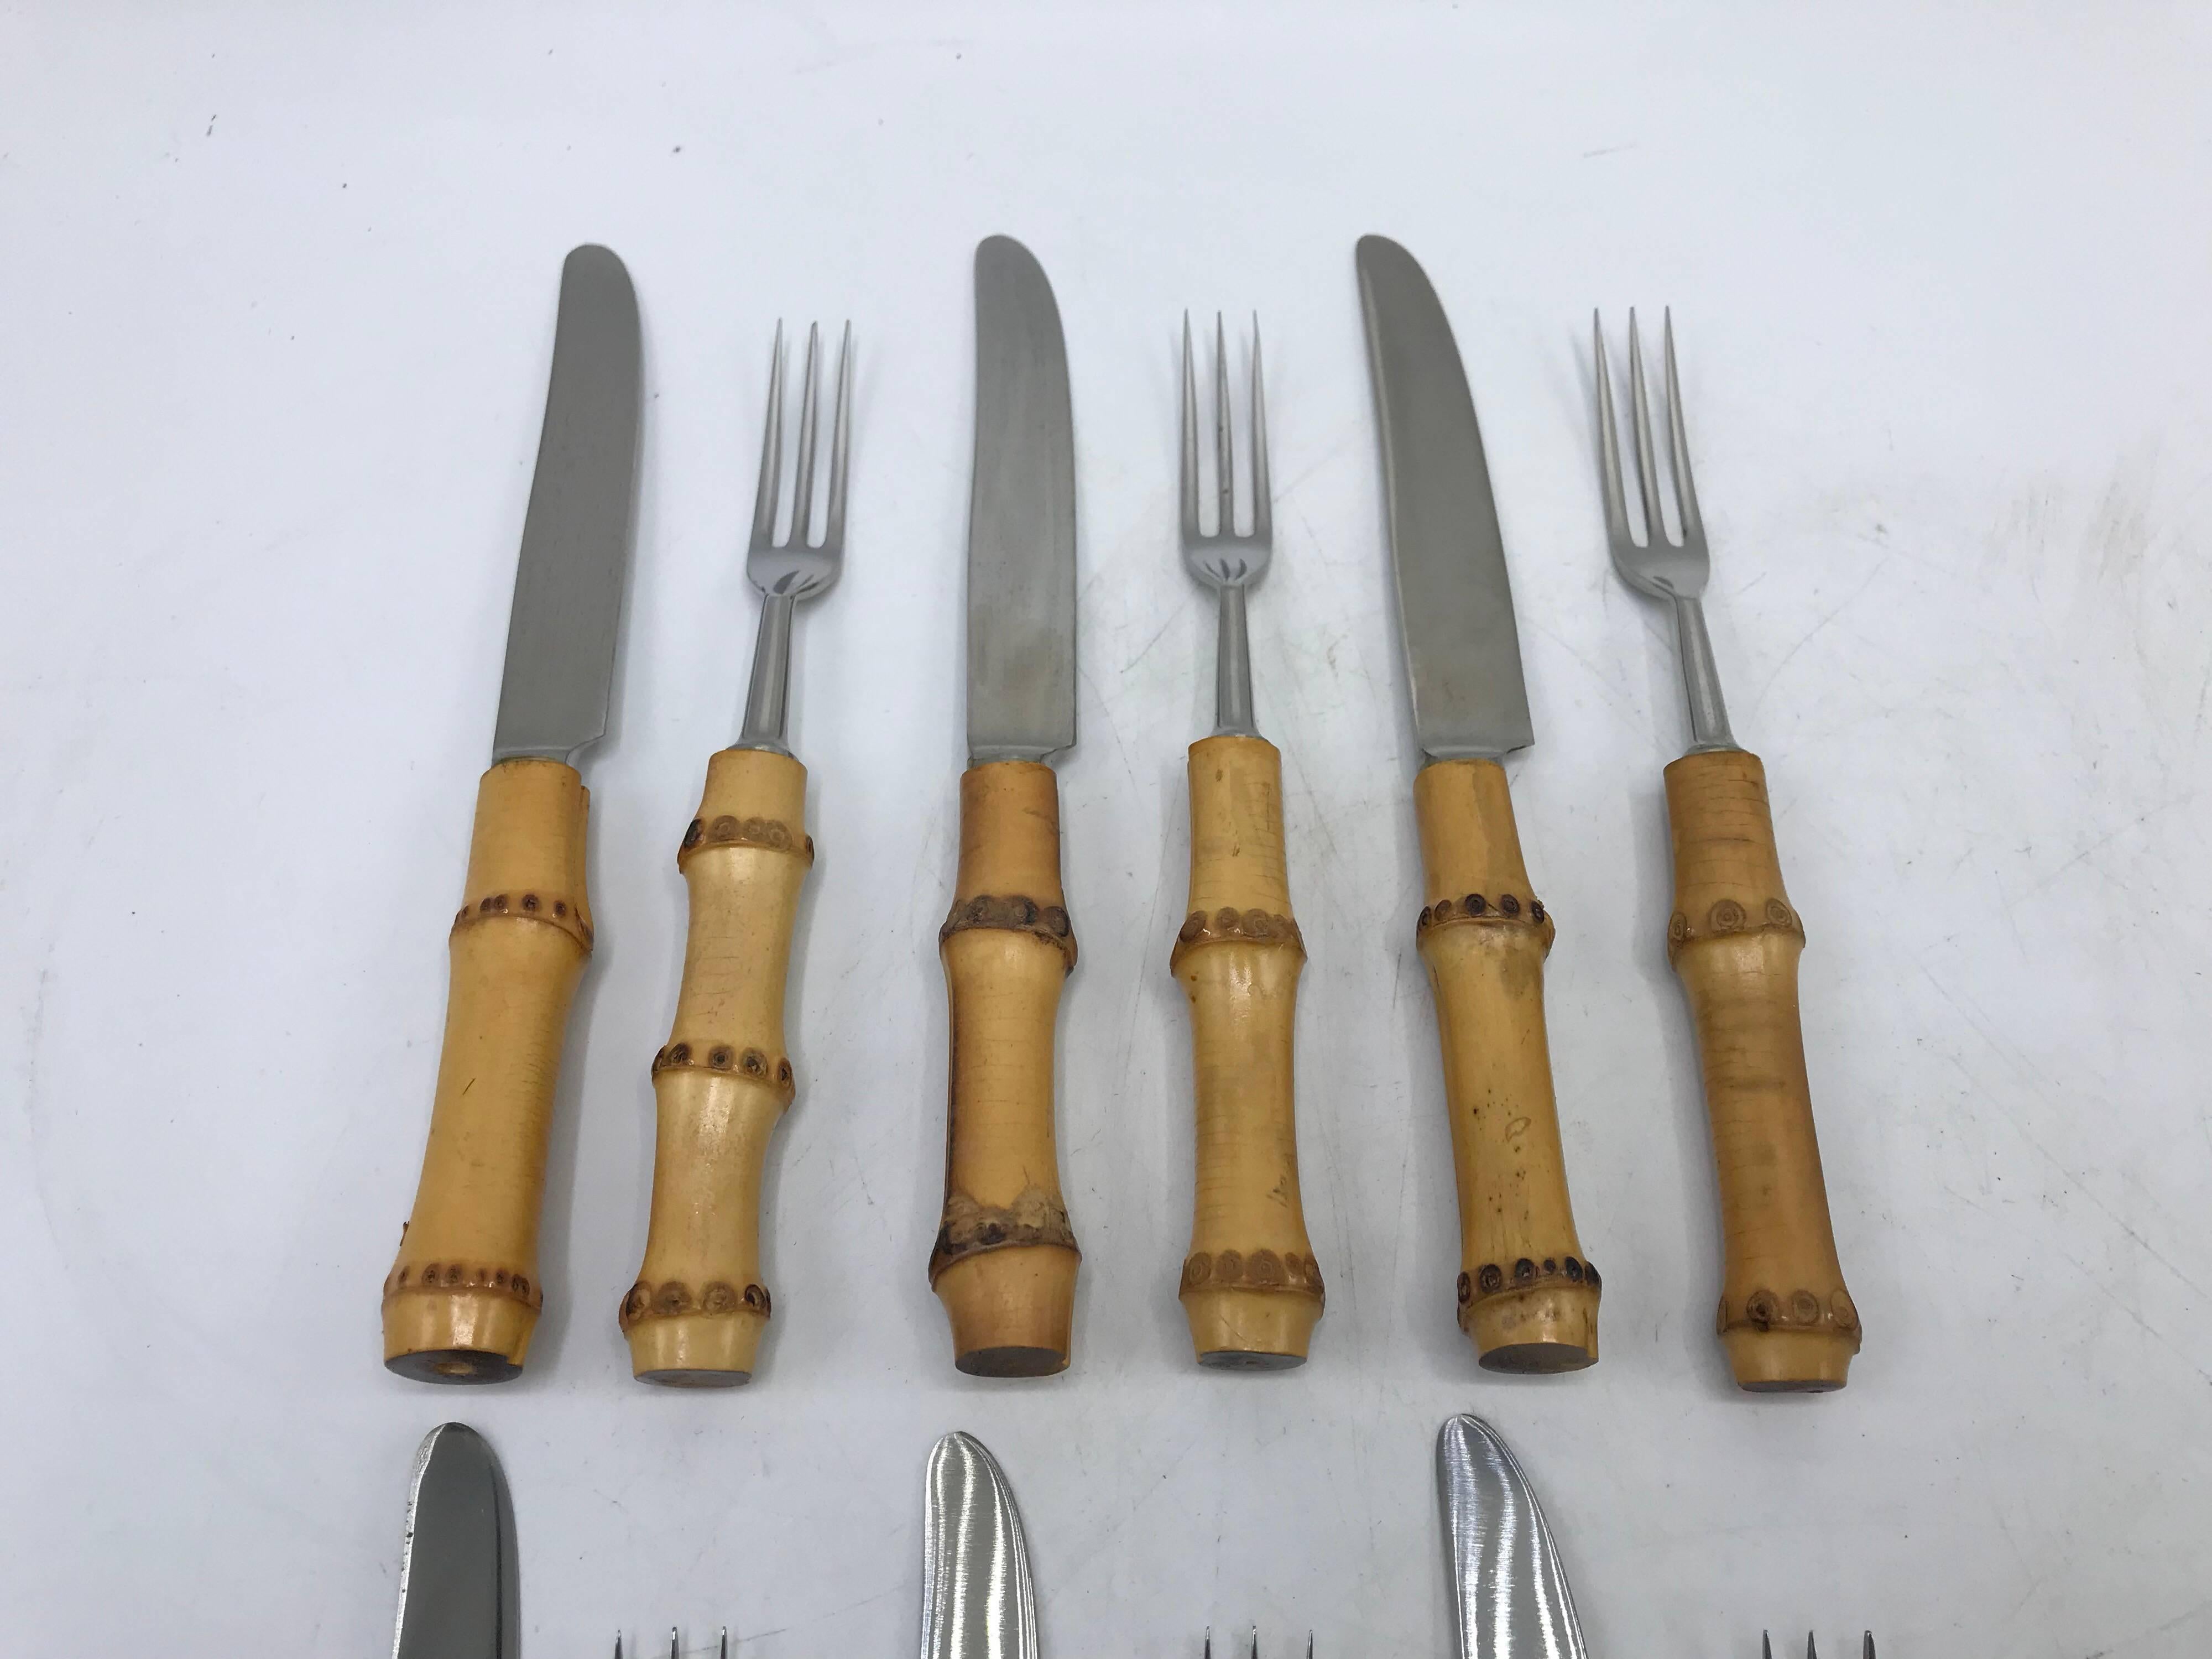 Listed is a fabulous, set of service for six, 1970s bamboo handled hors d’oeuvres fork and knife set. The set looks unused and is in excellent condition. 

Measures: Knife measures 6.5” long. Fork measures 5.75” long.